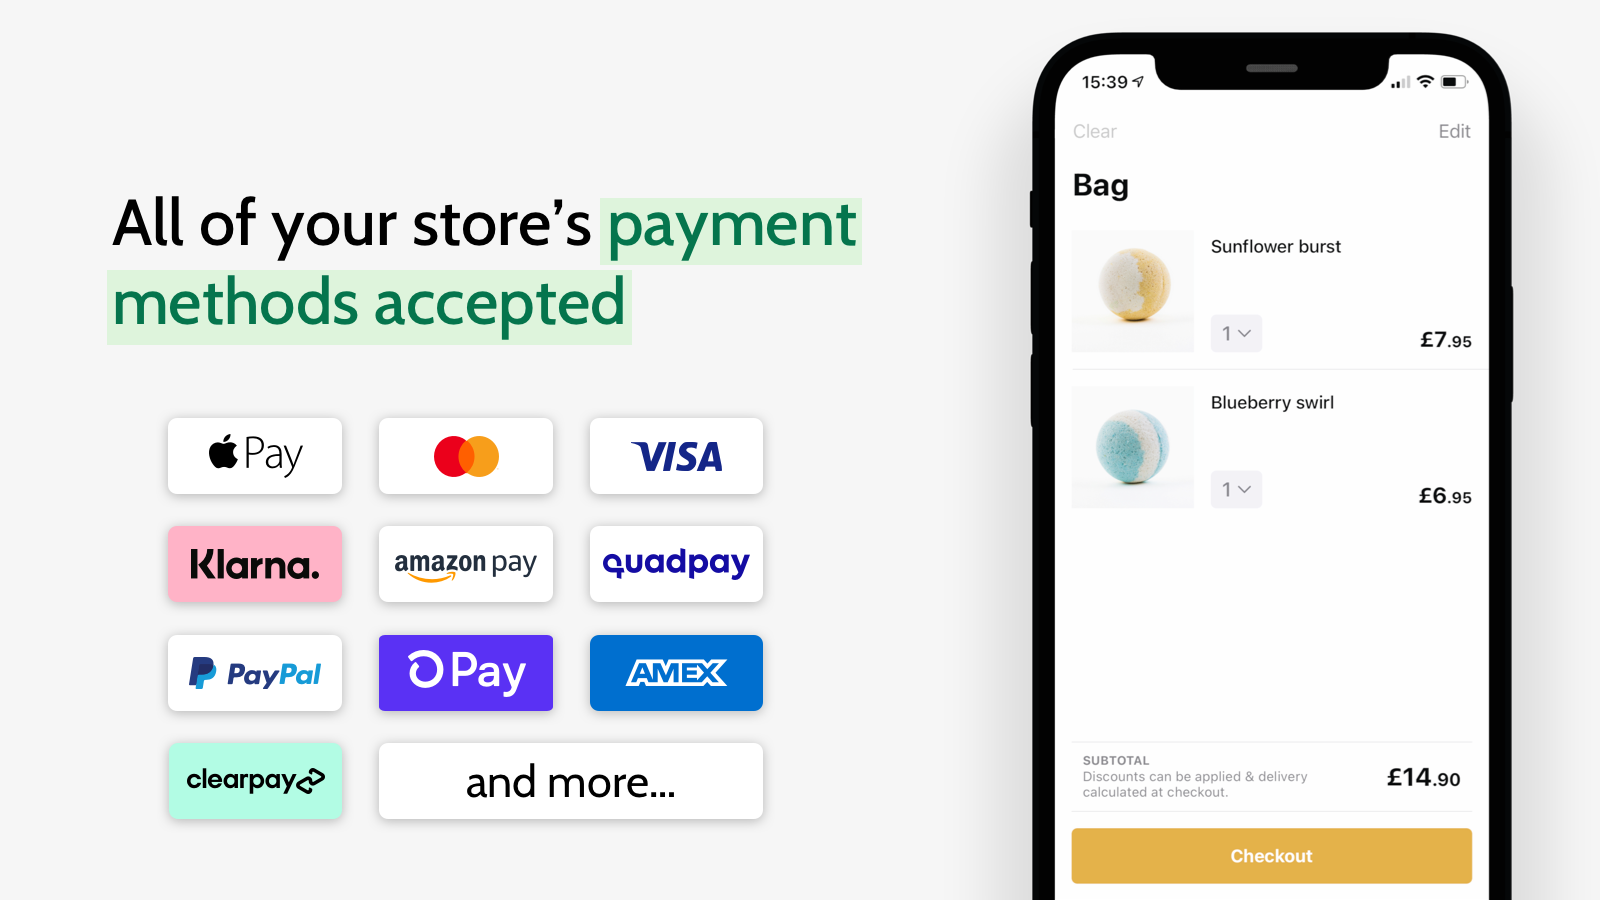 All of your store's payment methods accepted